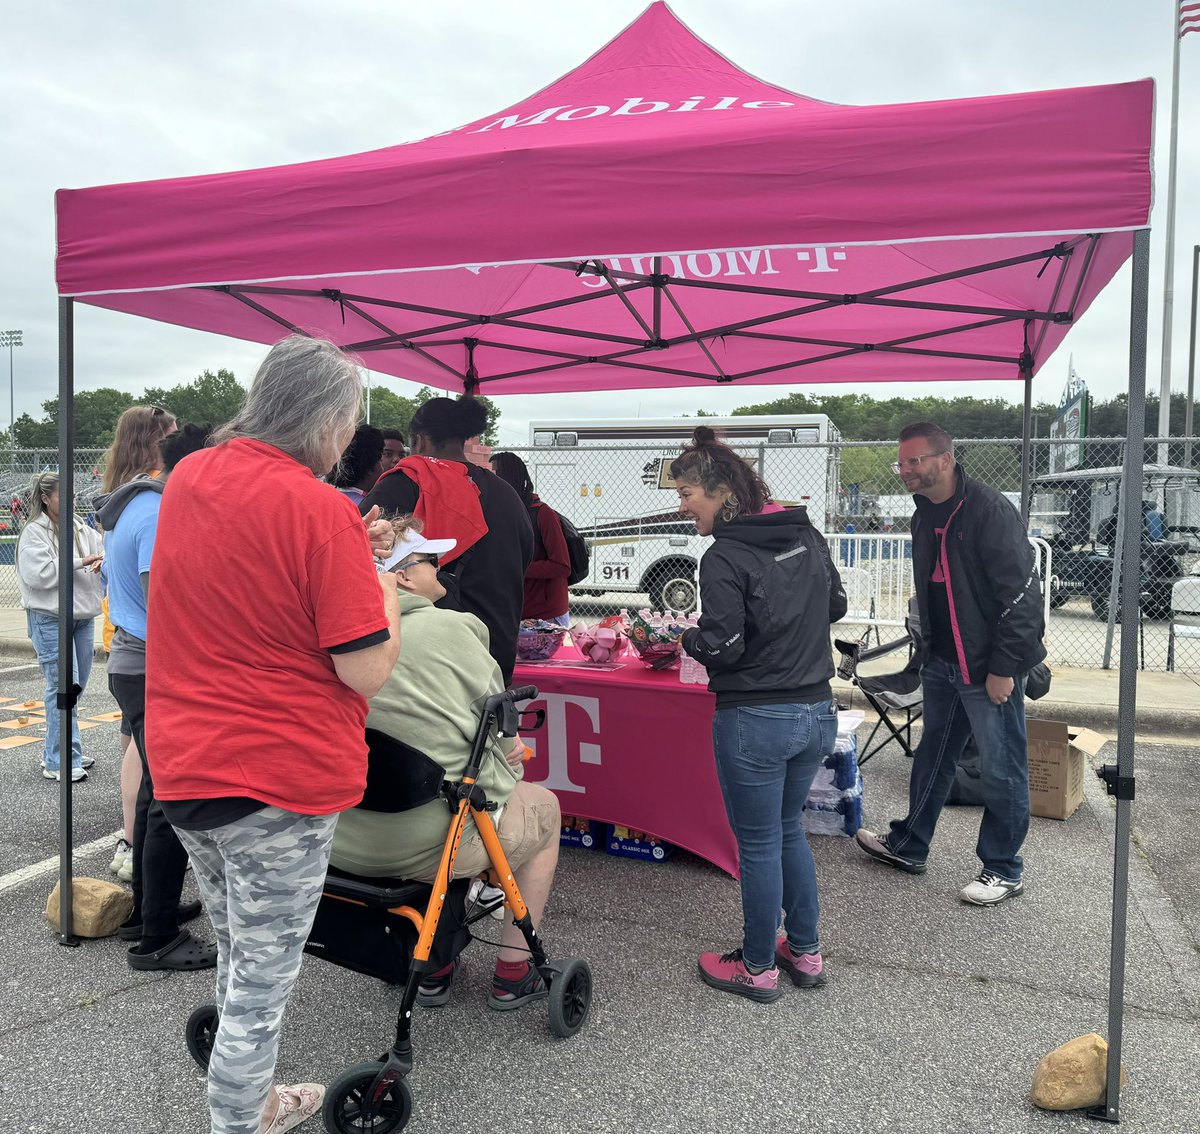 Lincoln County Special Olympics….. Love giving back to our communities…playing Jenga and Corn Hole, as well as giving out snacks and bottled water to the participants. @MrDennisJones @ChappyCLT @DAFerrera @AlexC808 @CarlaxDarling @24iris44